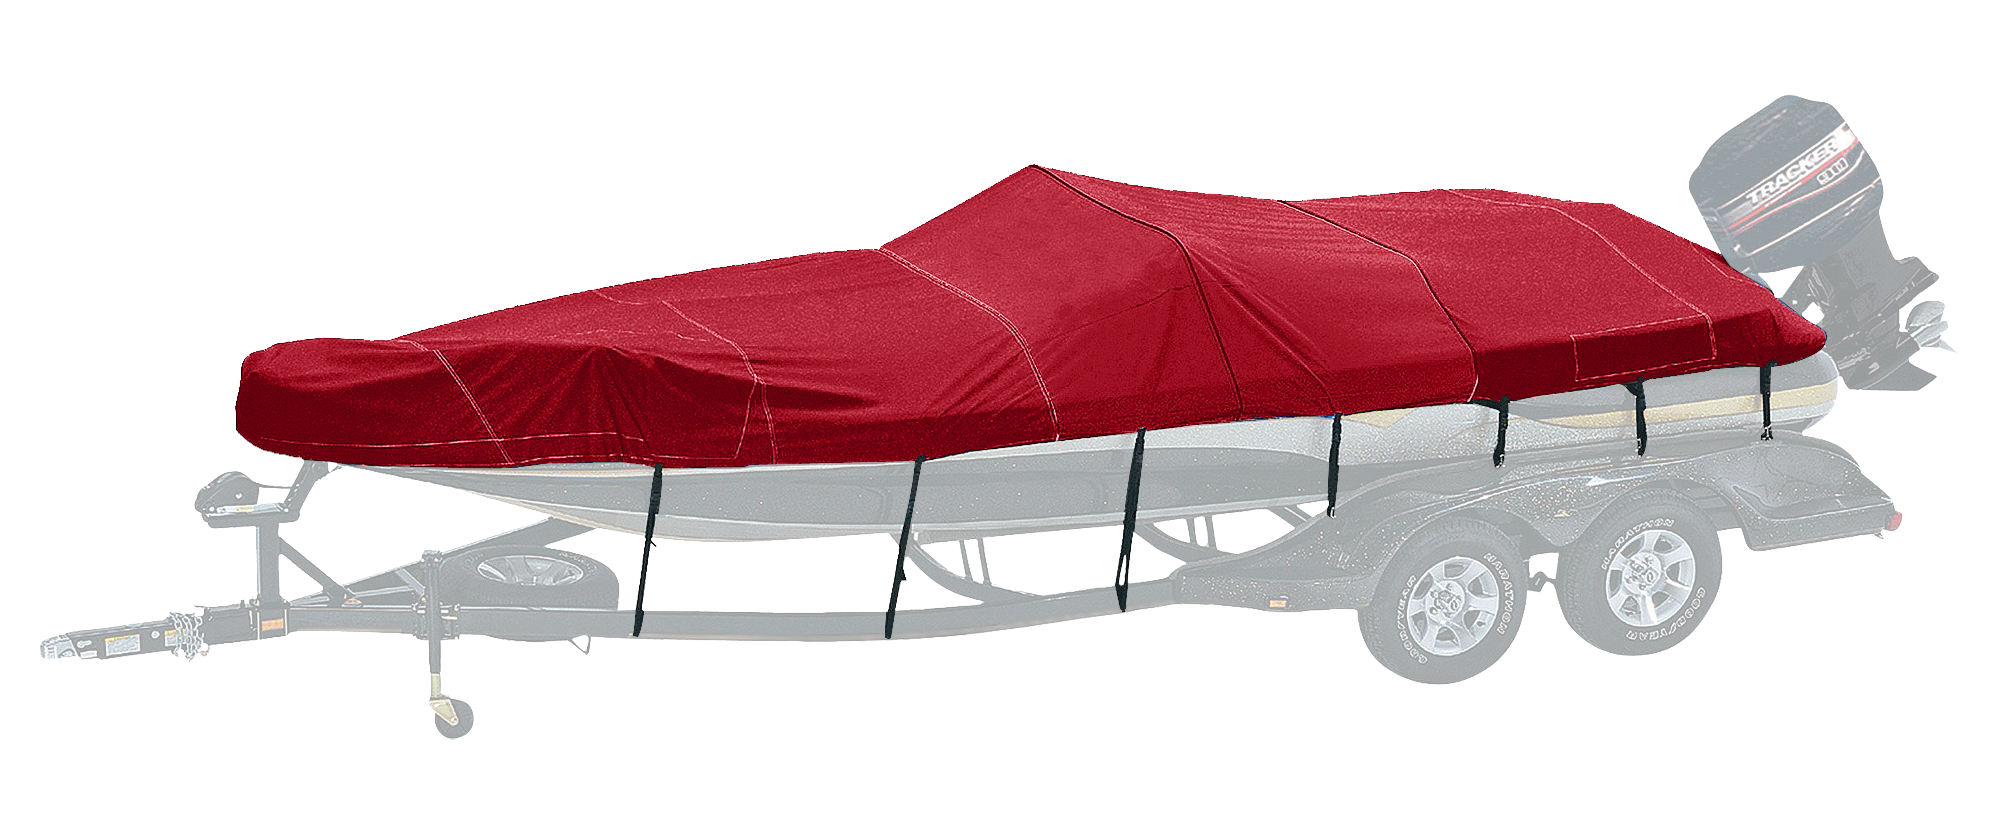 Bass Pro Shops Exact Fit Custom Boat Cover by Westland - Tracker Boats - 2002-2005 Pro Crappie 175 SC - Burgundy